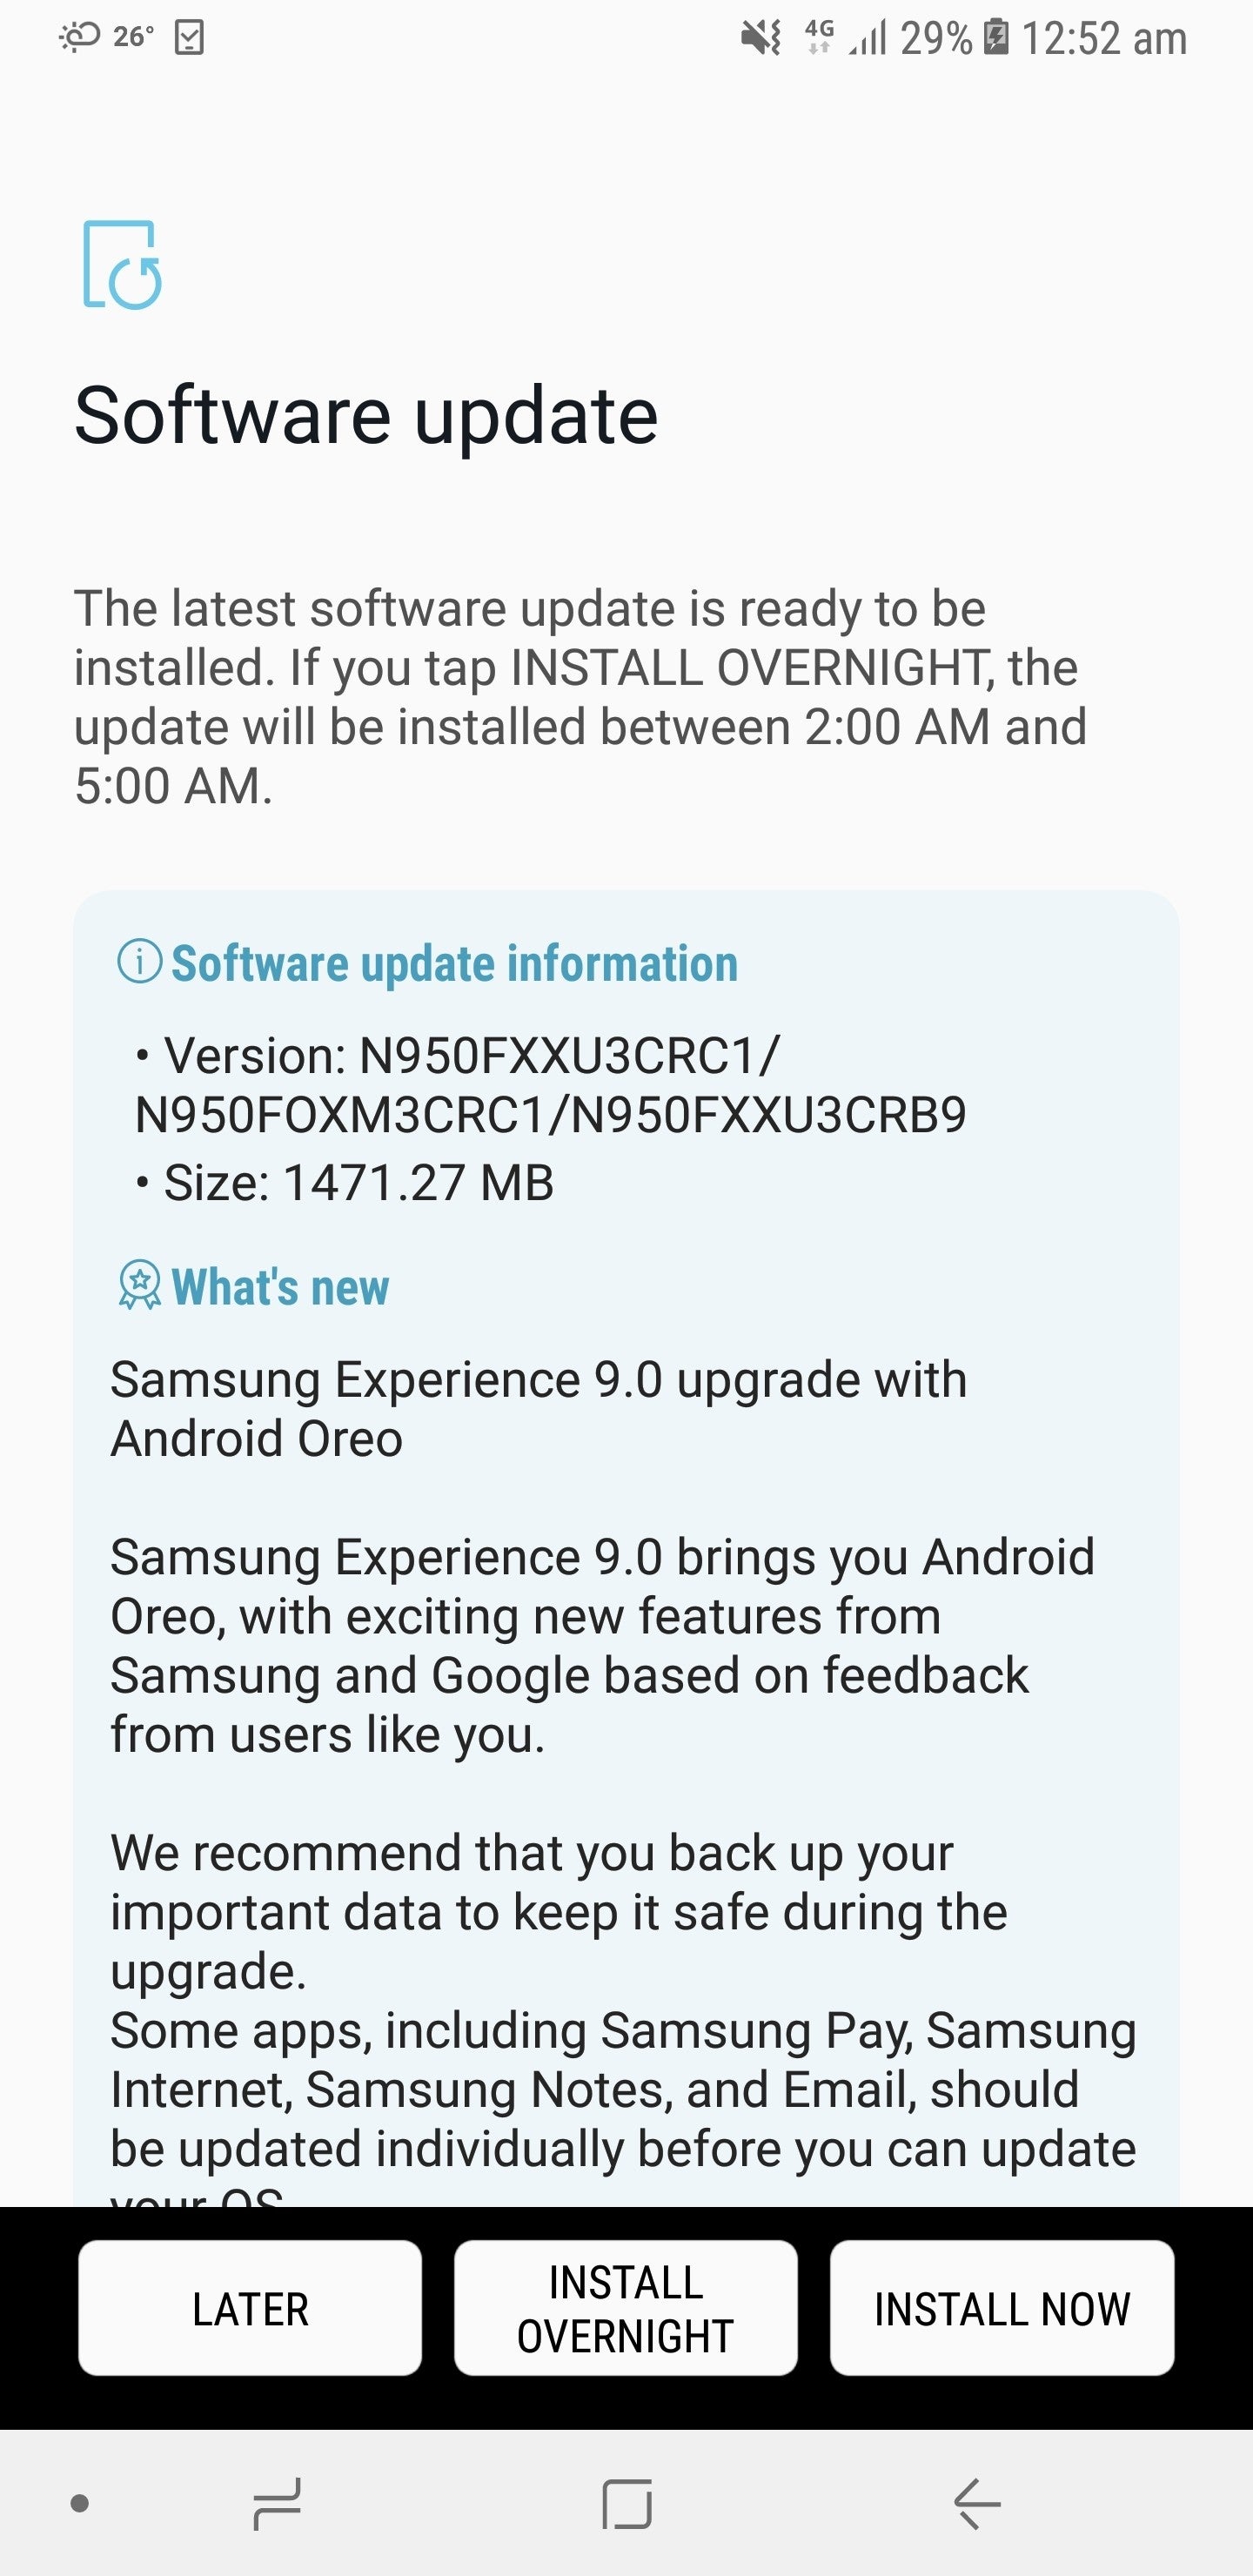 Samsung Galaxy Note 8 starts receiving Android 8.0 Oreo